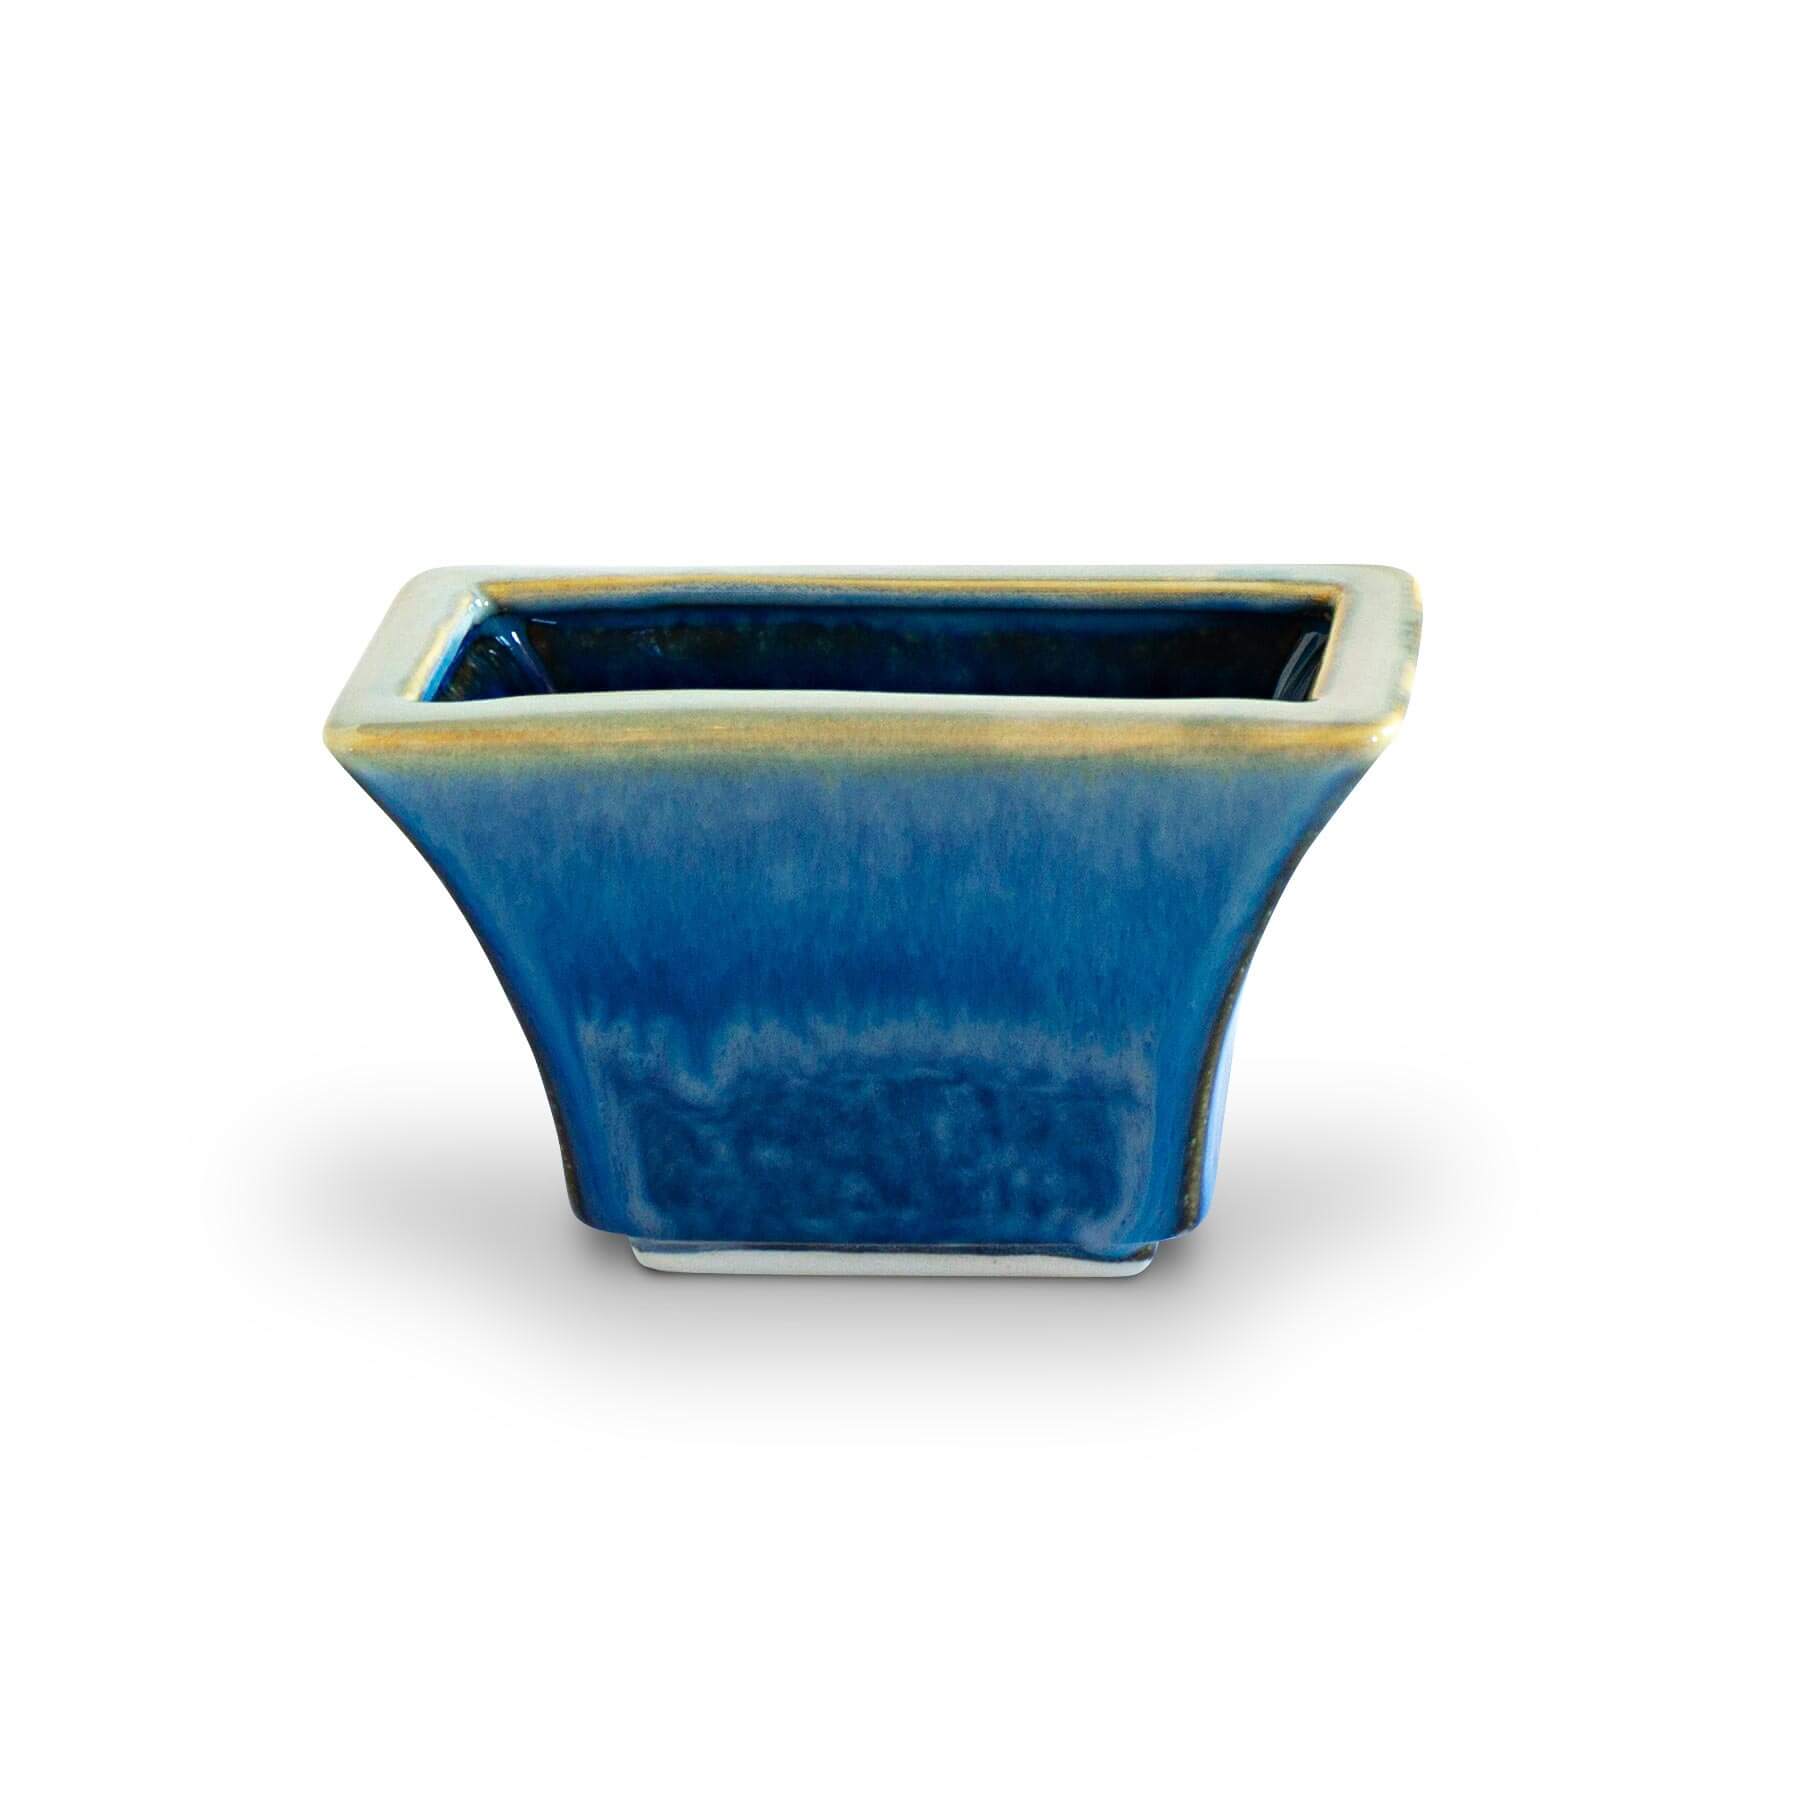 Handmade Pottery Windowsill Planter in Cobalt pattern made by Georgetown Pottery in Maine